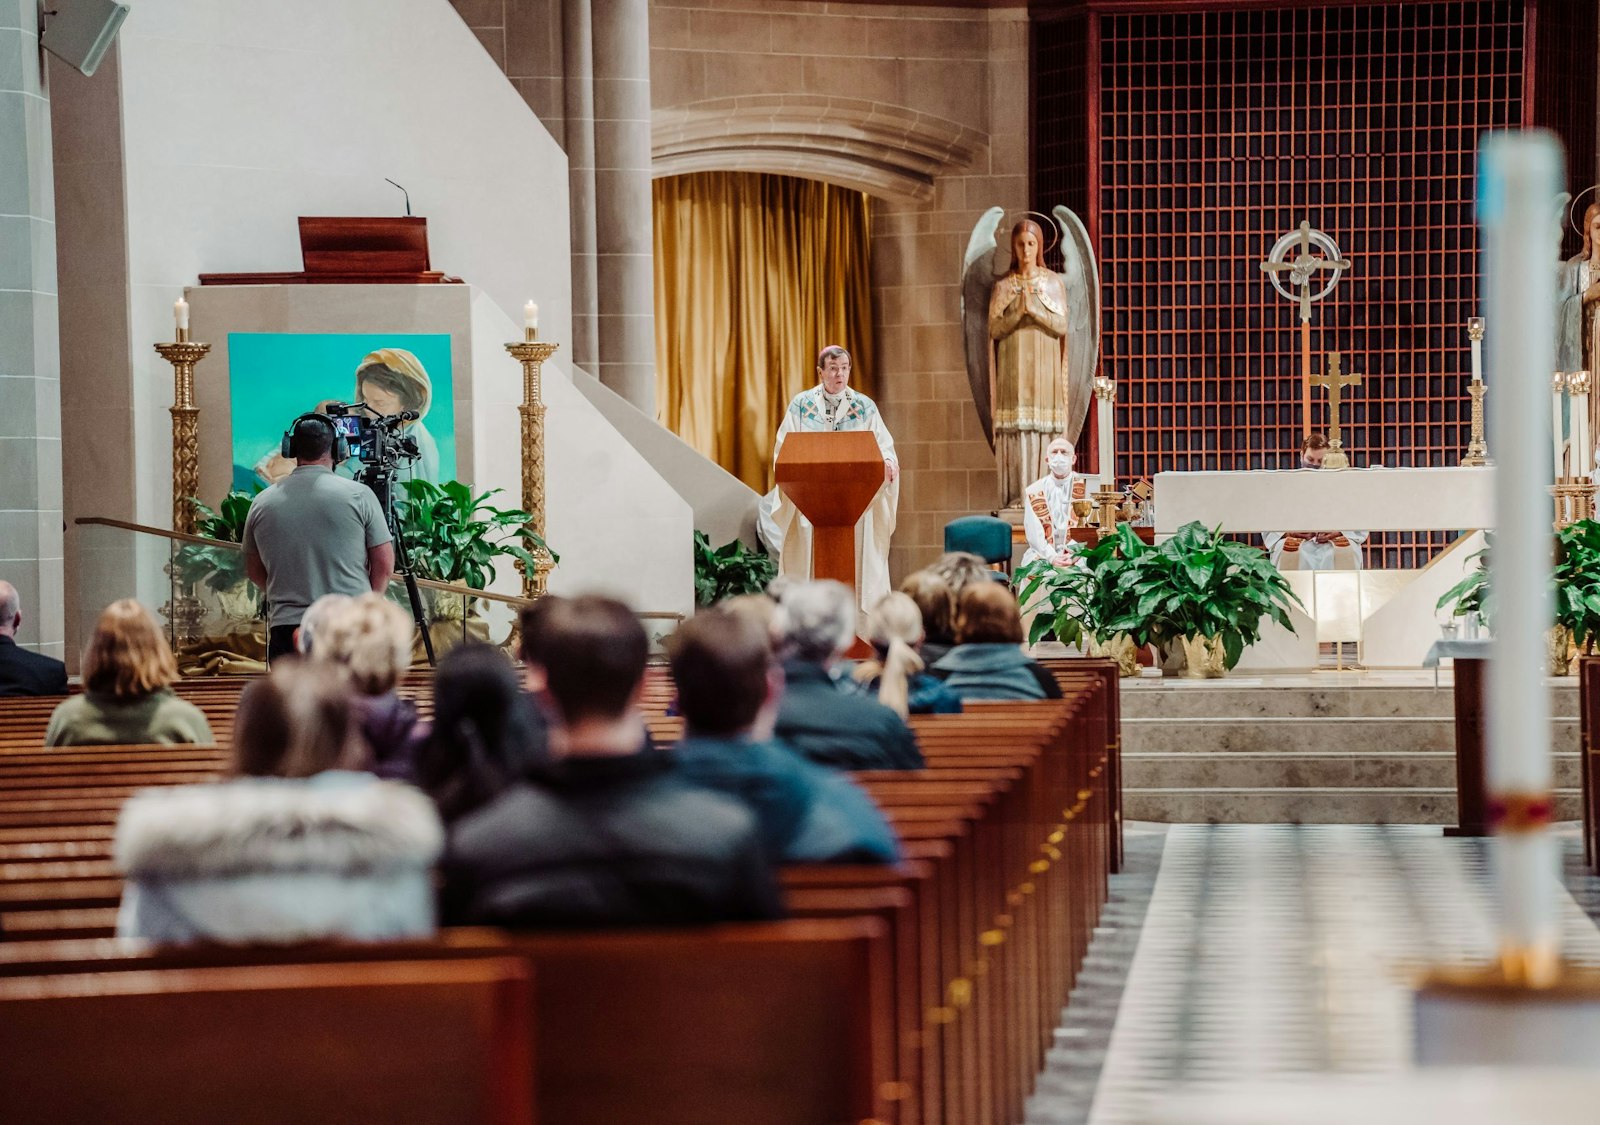 Archbishop Allen H. Vigneron preaches last year during a Mass for the Protection of the Unborn at the Cathedral of the Most Blessed Sacrament in Detroit. The archbishop will celebrate the Mass again this year at 11 a.m. Sunday, Jan. 23. (Valaurian Waller | Detroit Catholic)